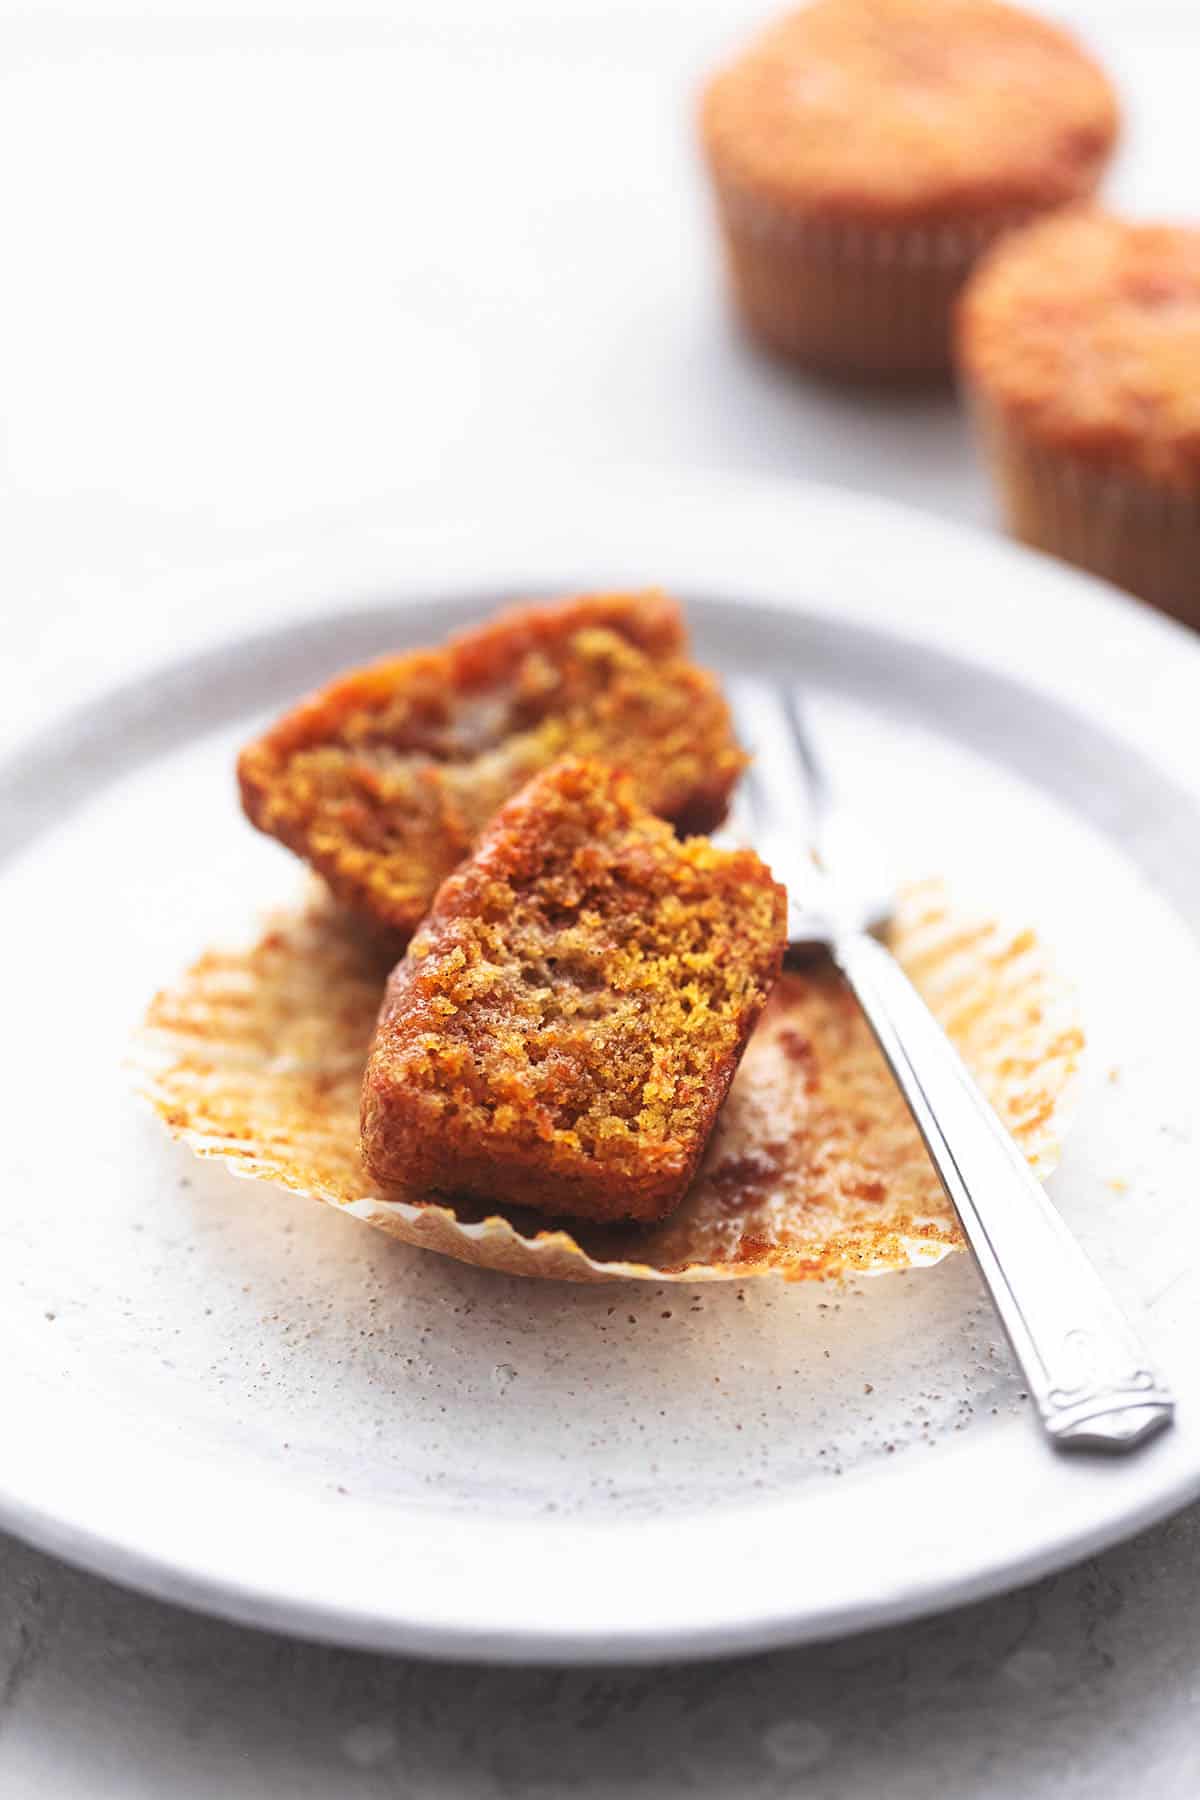 a carrot cake muffin cut in half with a fork on a plate with more muffins on the side.